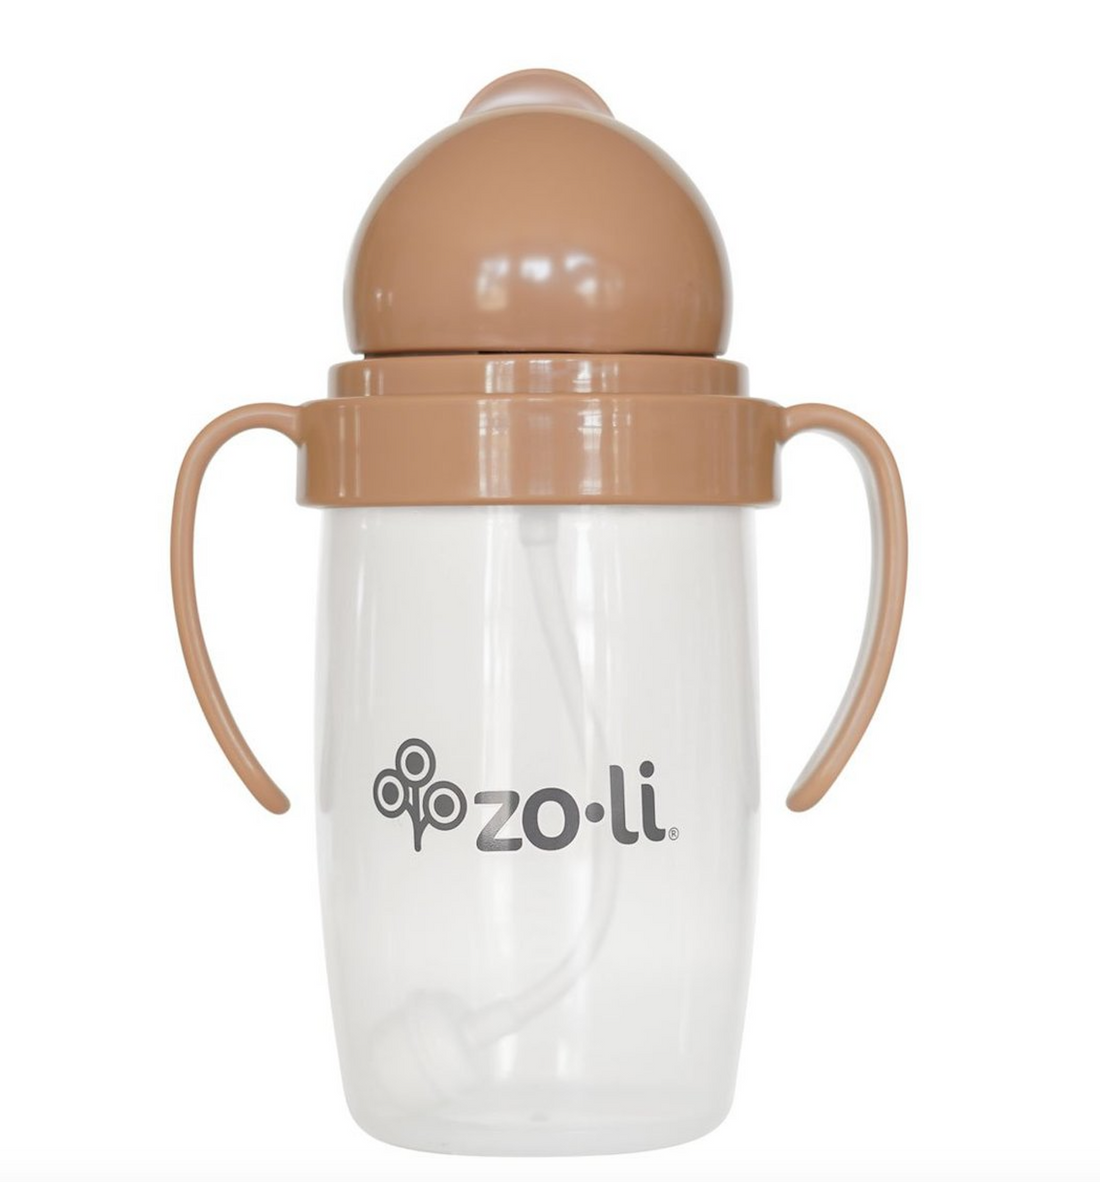 Bot 2.0 Sippy Cup